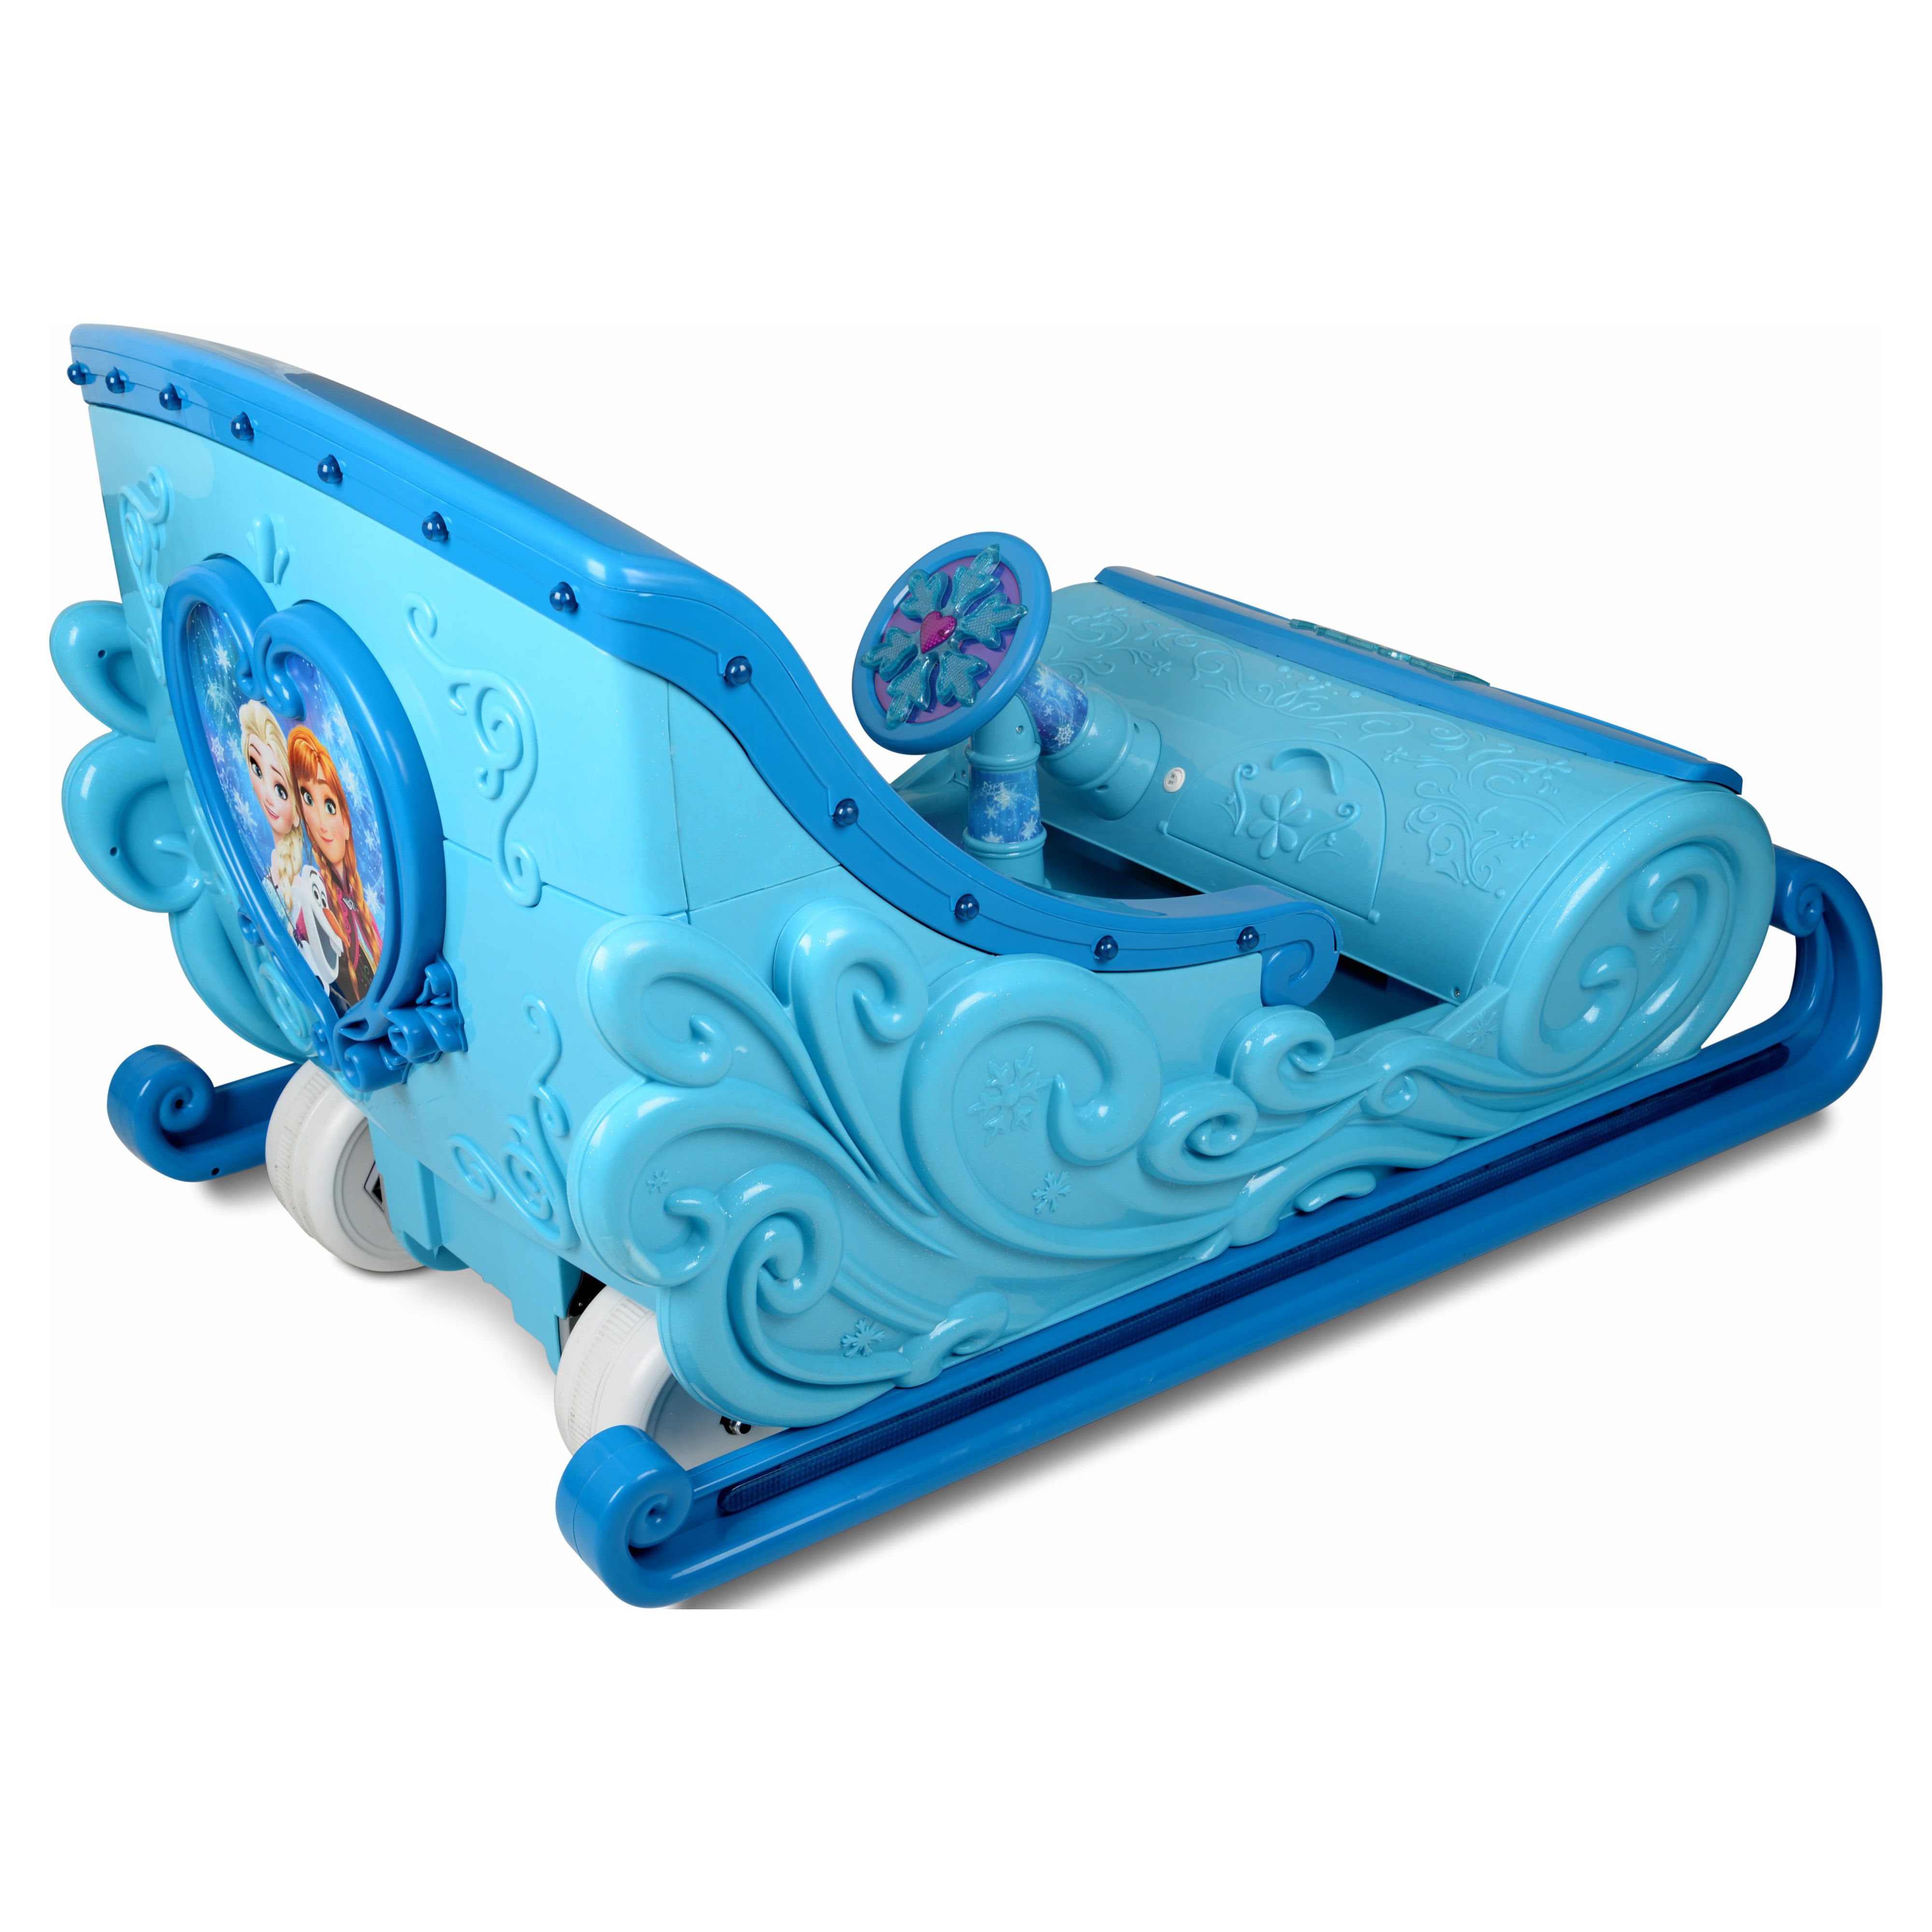 Disney Frozen Sleigh 12-Volt Battery Powered Ride-On for your little Elsa and Anna - Hours of Fun! - image 2 of 6